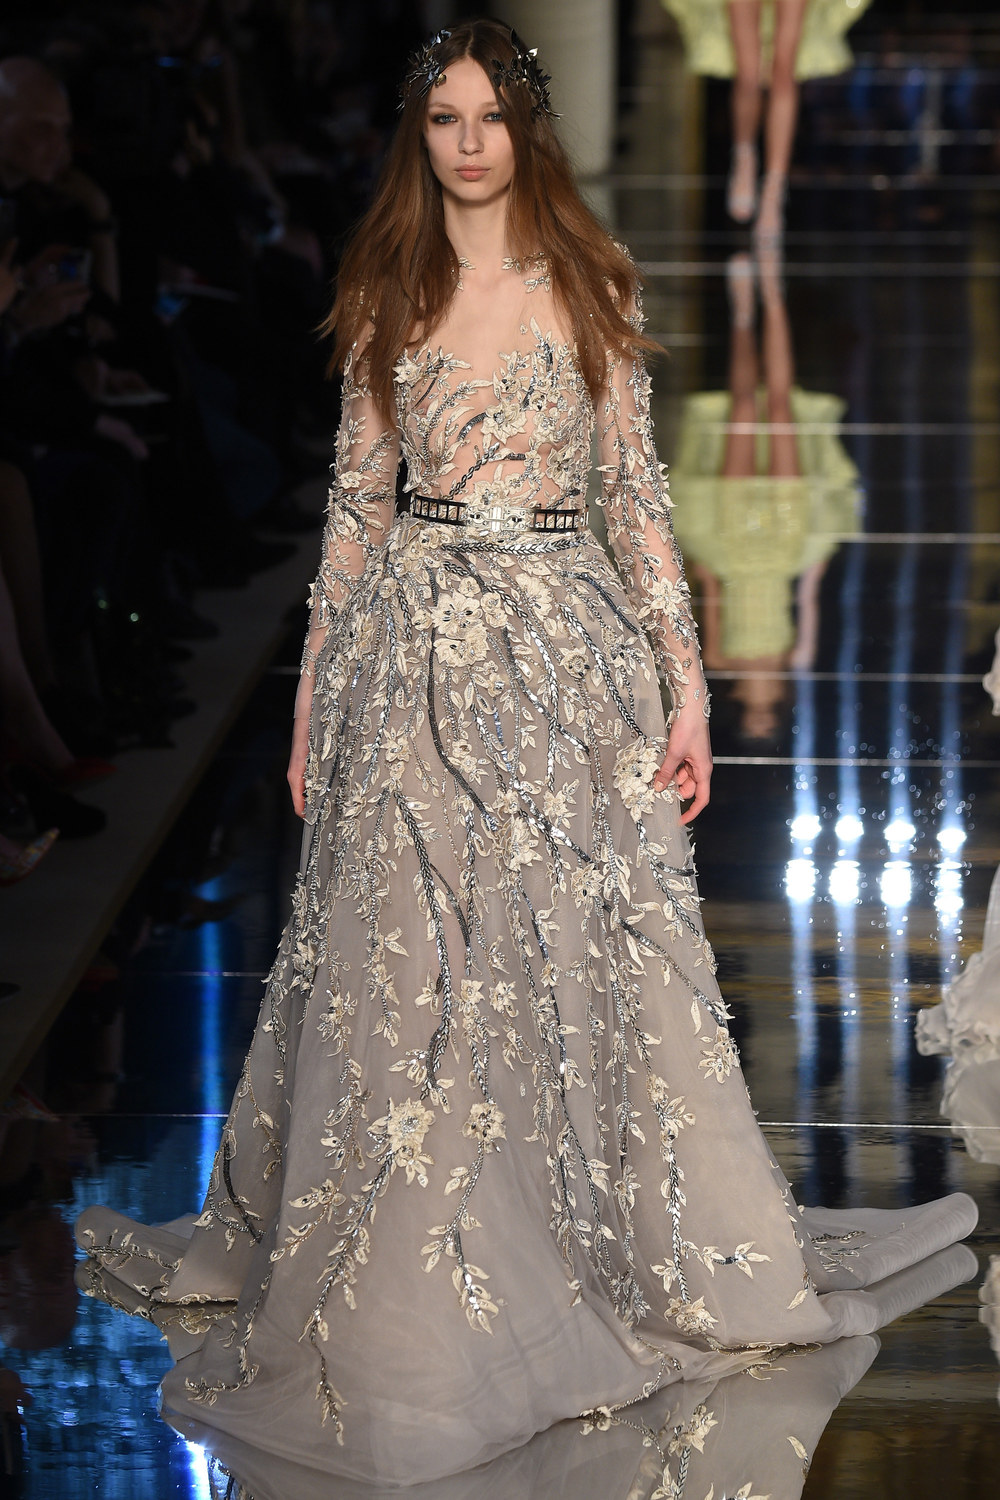 The Latest Zuhair Murad Haute Couture Collection | Arabia Weddings